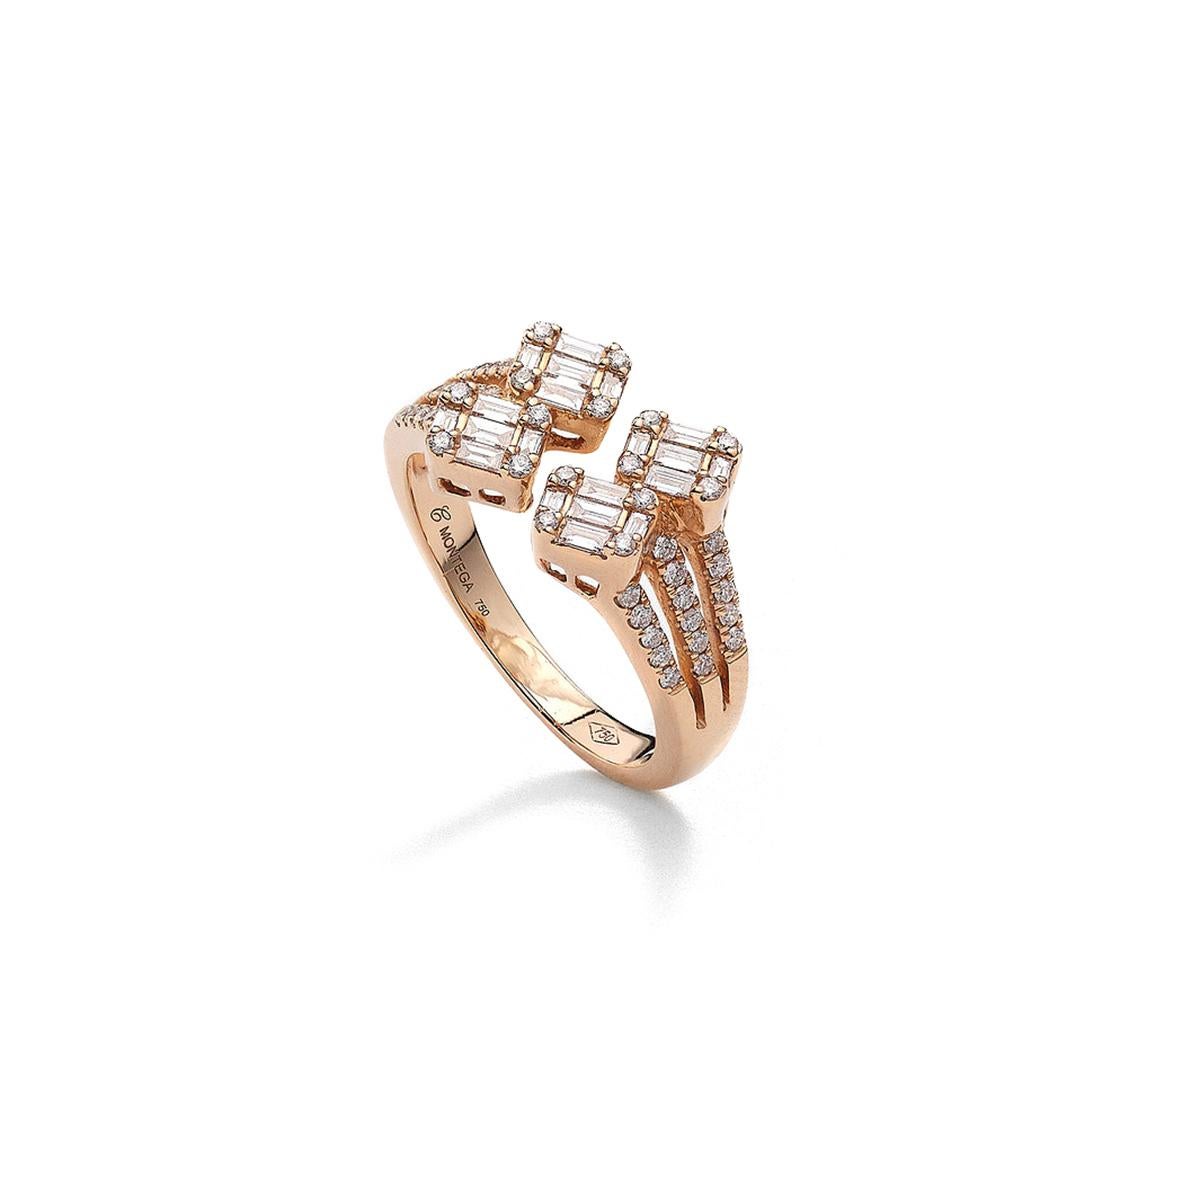 Ring in 18kt pink gold set with 20 baguette cut diamonds 0.29 cts and 48 diamonds 0.25 cts Size 52 